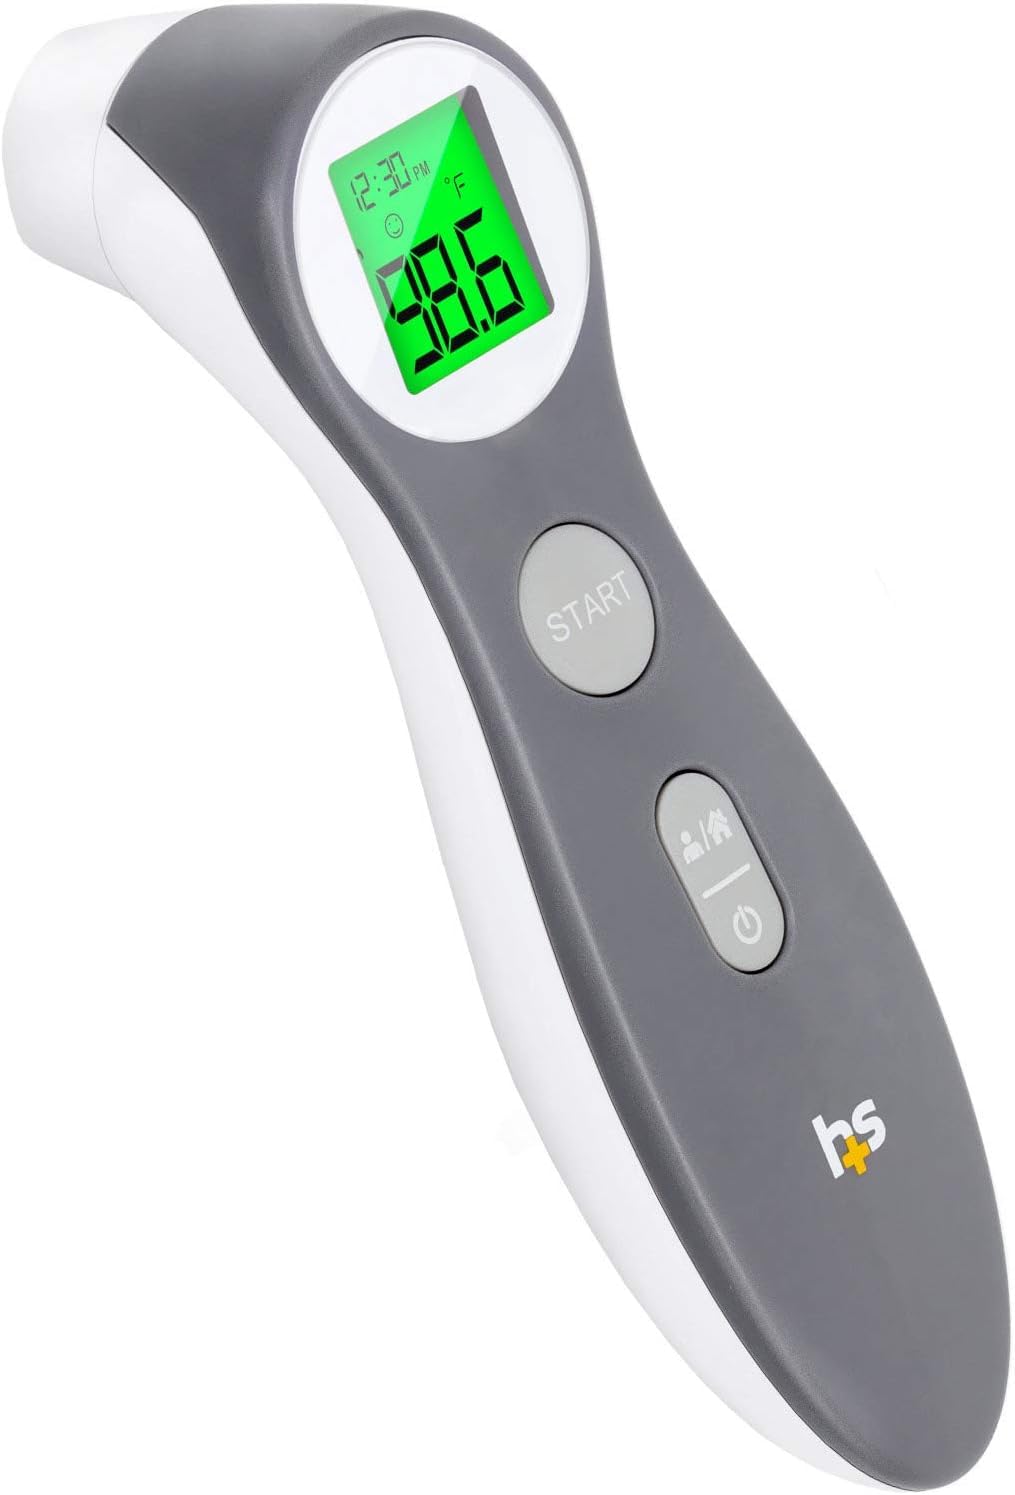 HealthSmart Digital Thermometer for Adults and Children, Forehead Thermometer, Baby Thermometer, Infrared Thermometer, Temperature Gun to Test Objects or Air, FSA & HSA Eligible